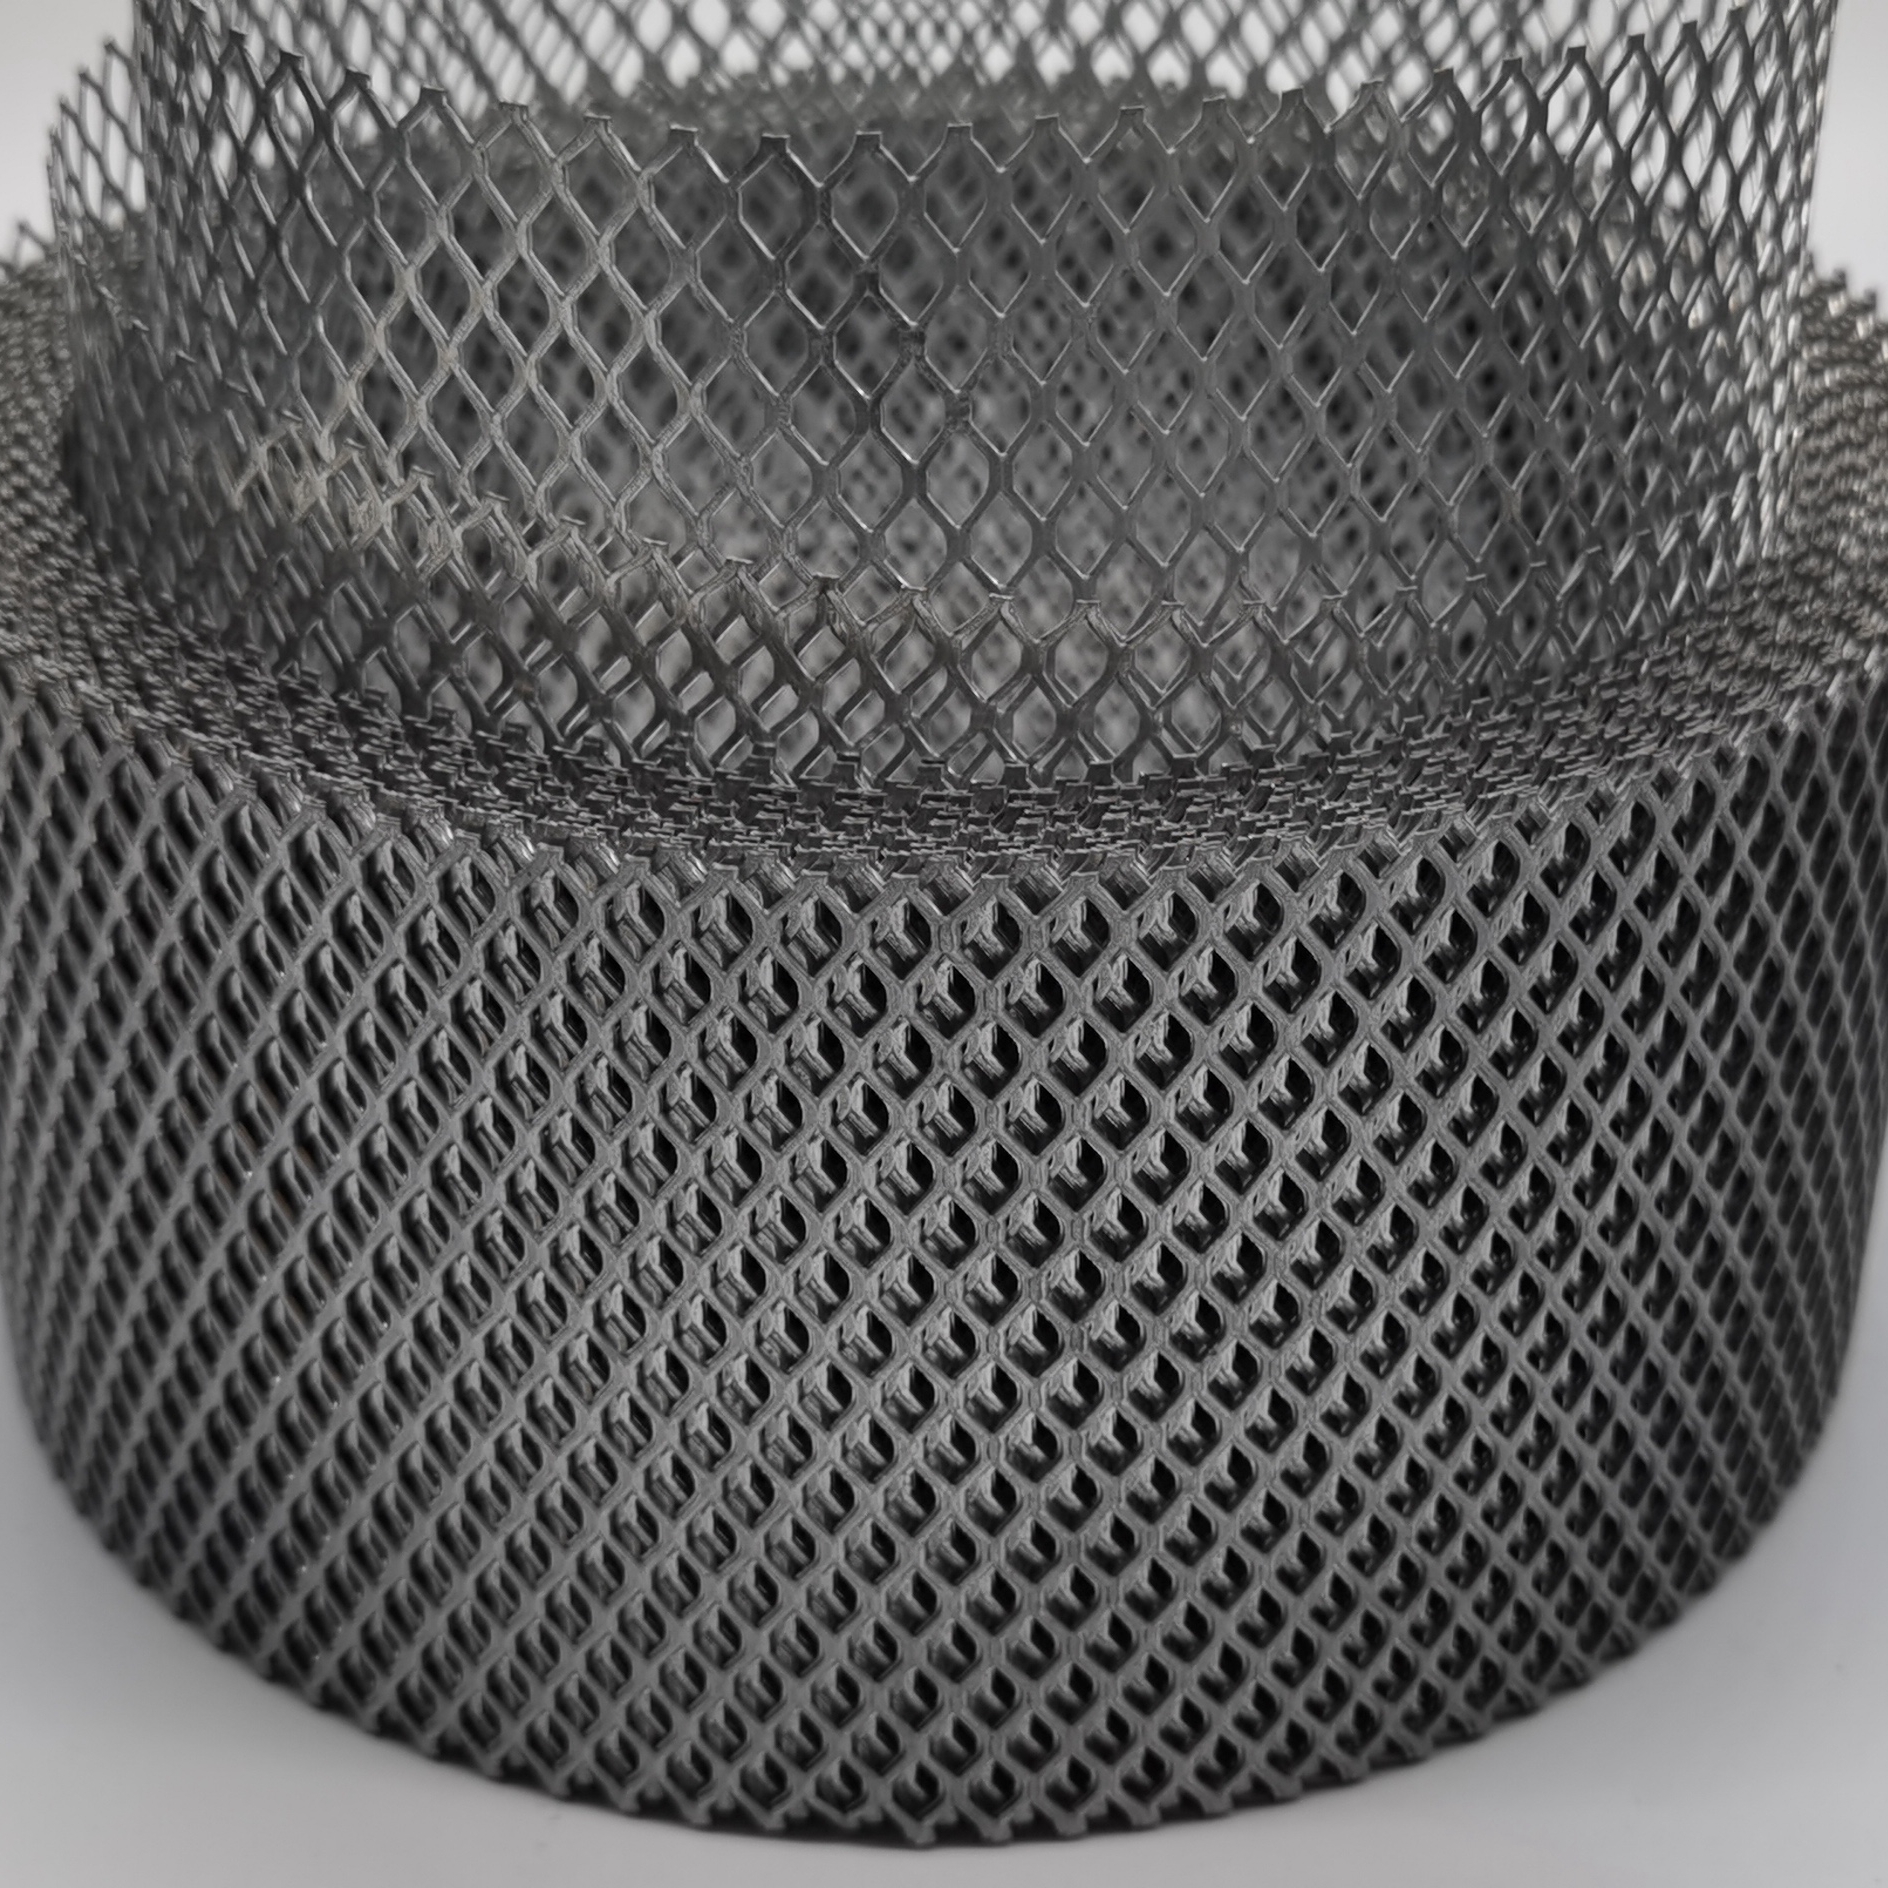 What shapes can stainless steel filter screens be made?